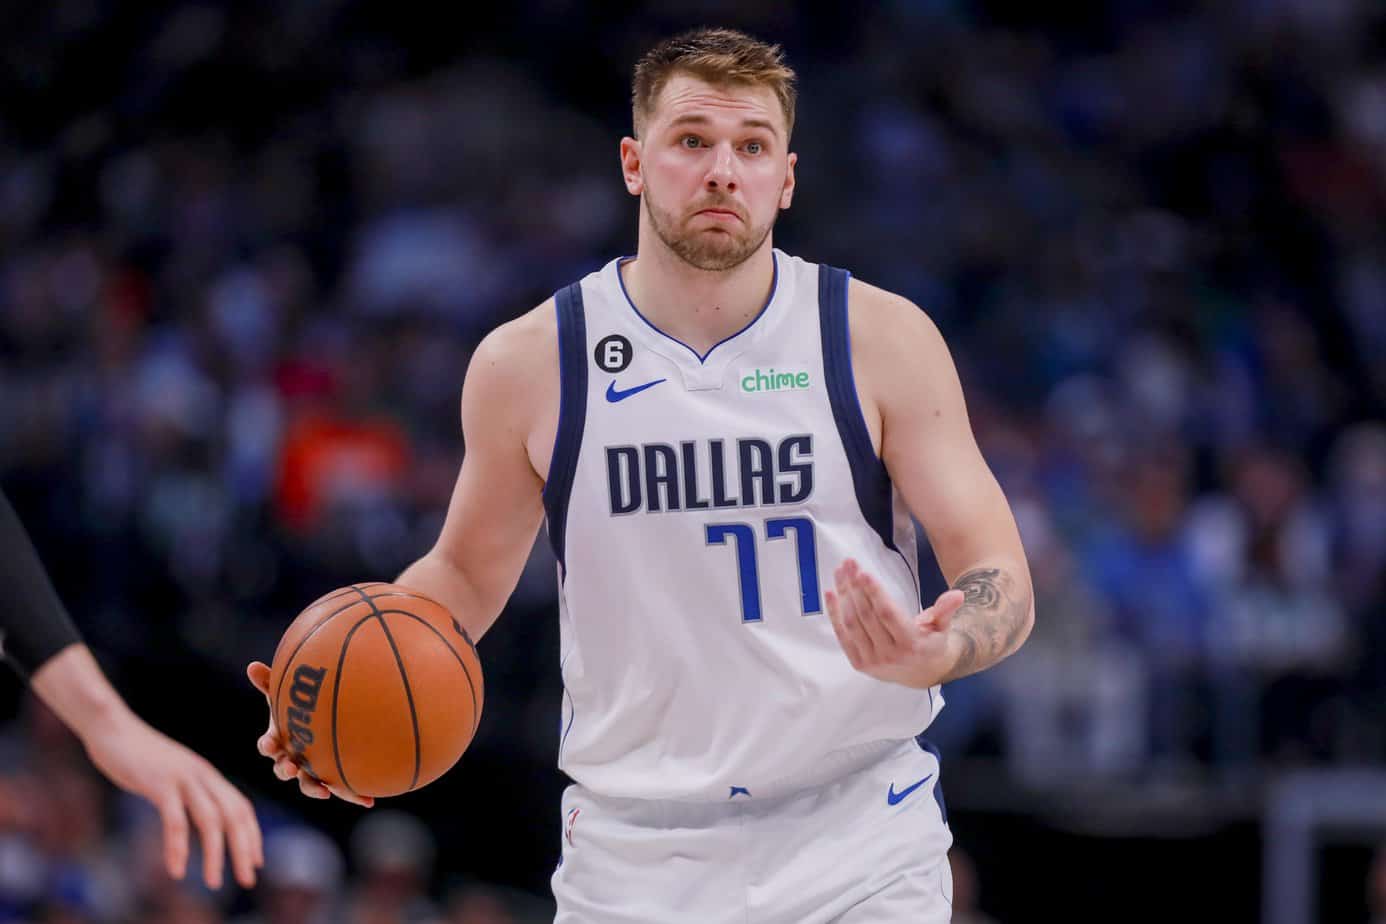 Stokastic runs over some of the best NBA DFS contrarian picks and plays for daily fantasy basketball lineups like Luka...